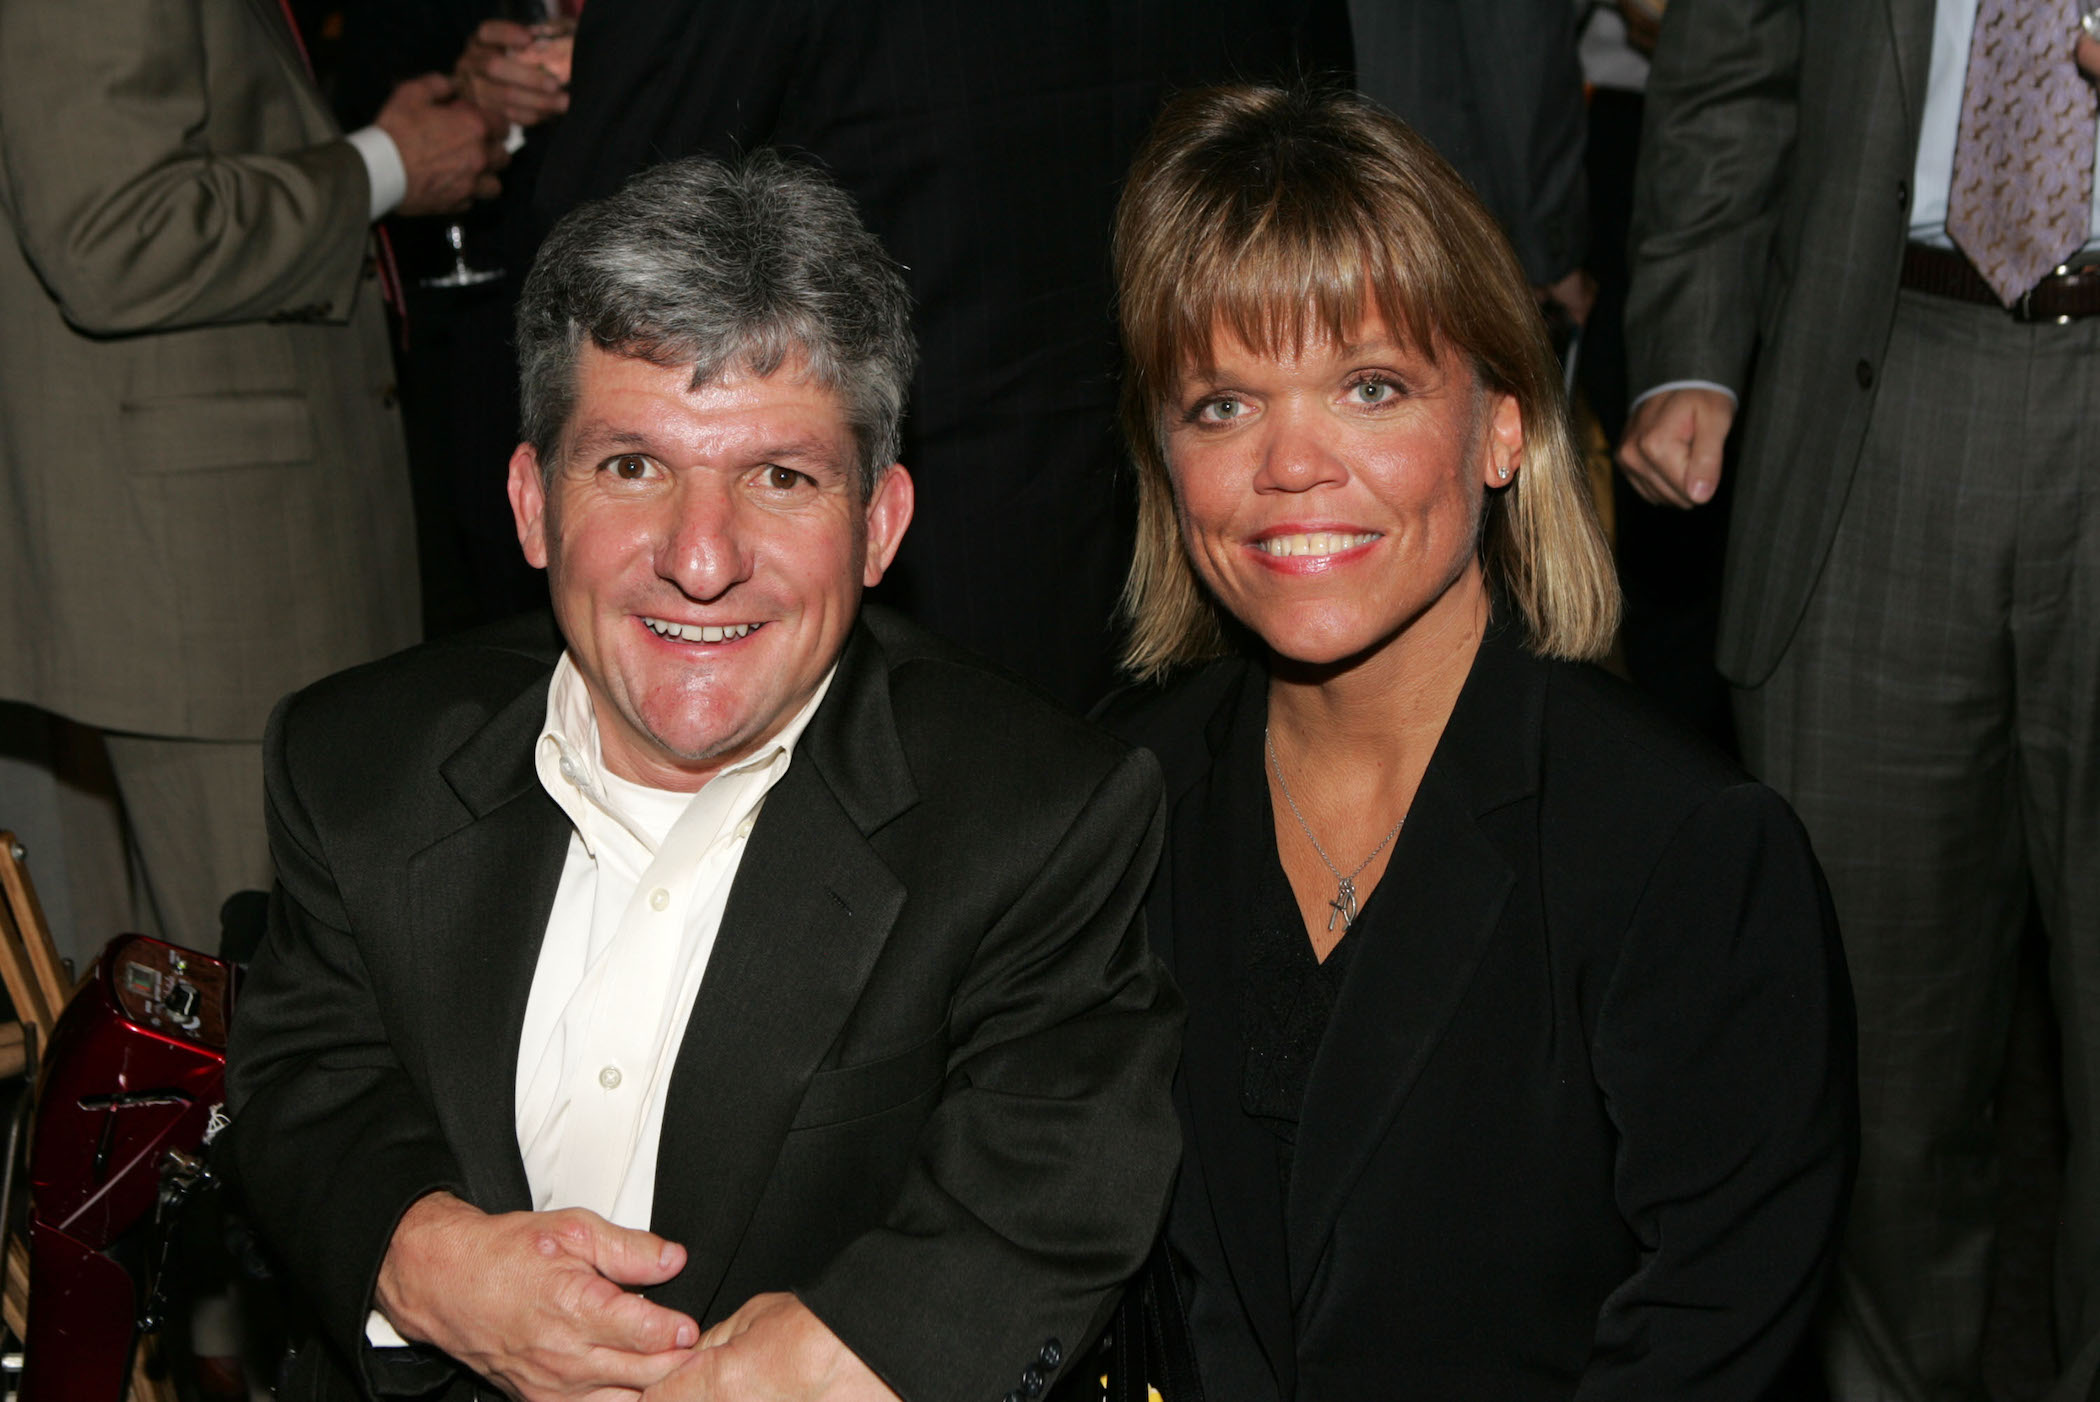 Matt and Amy Roloff from 'Little People, Big World' sitting together against a dark background and smiling